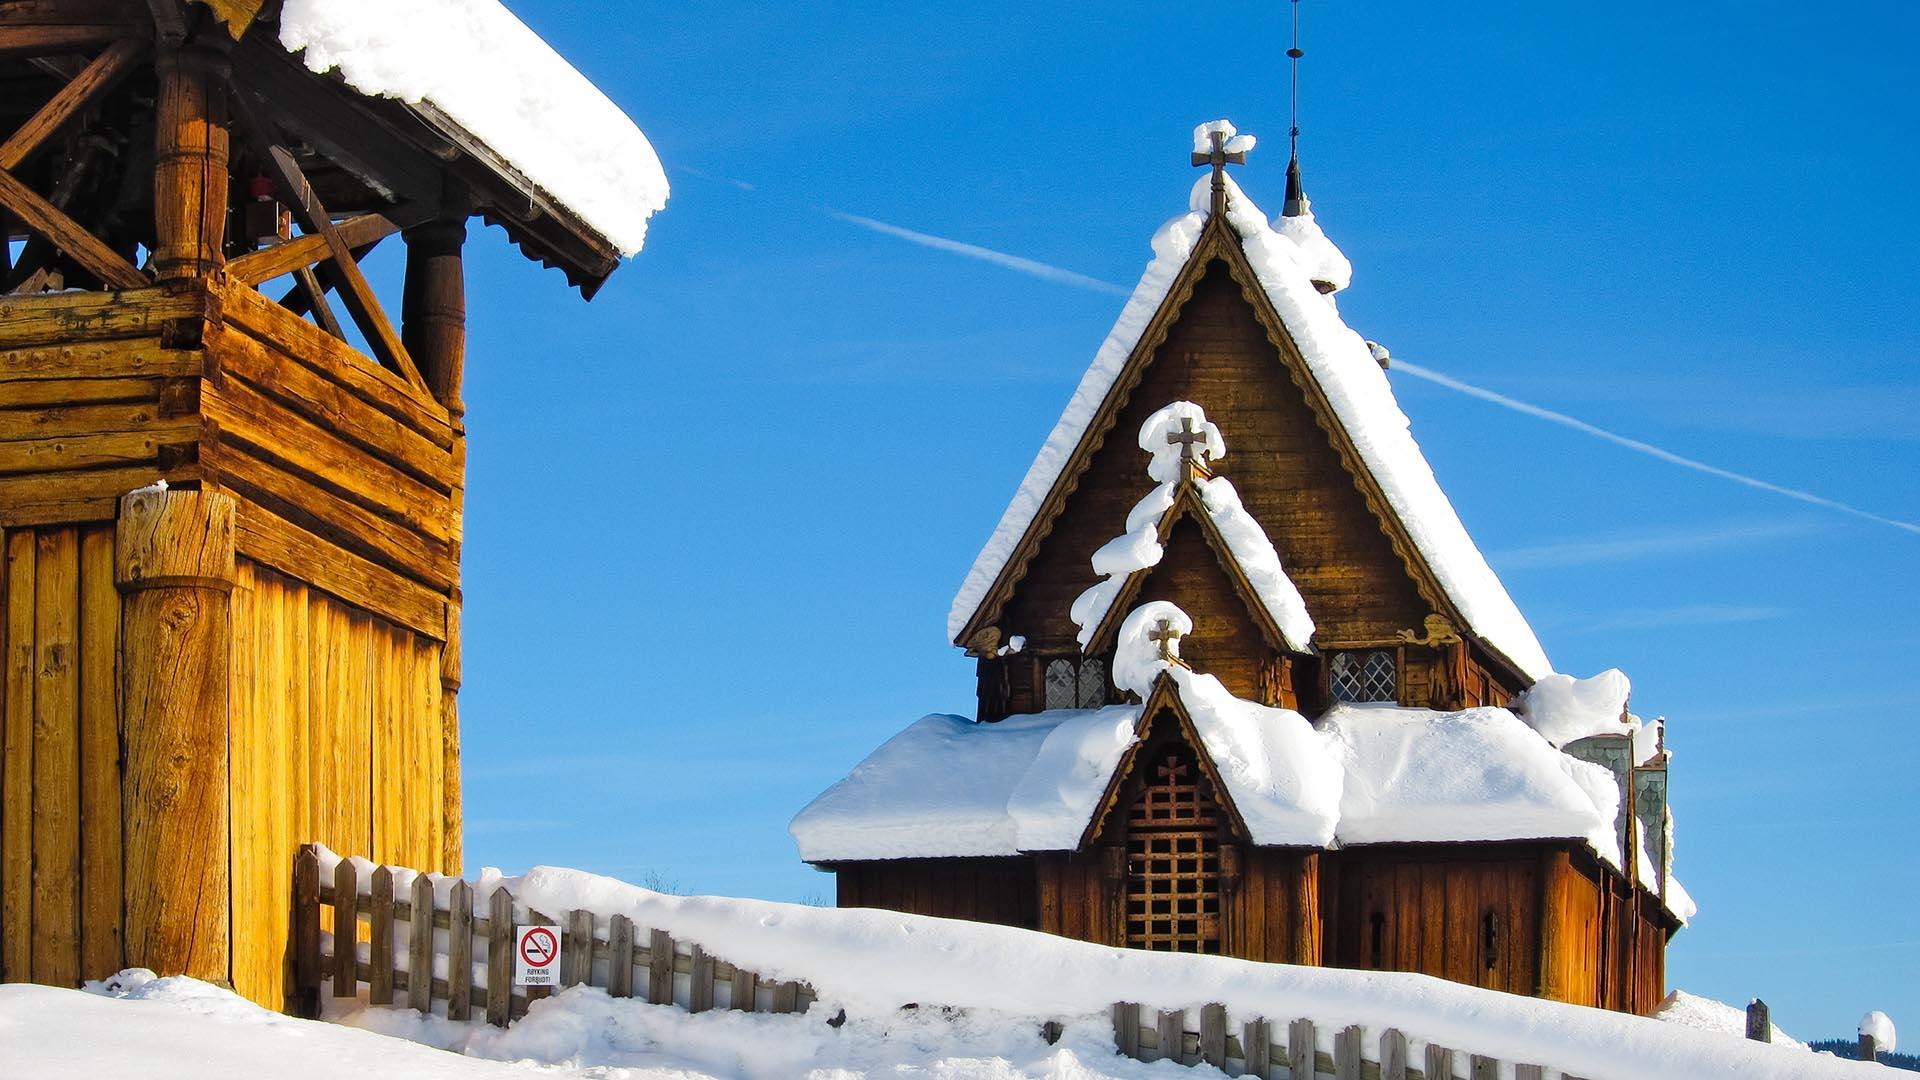 A stave church in the snow on a clear winter's day. The belltower can partly be seen in the forground.